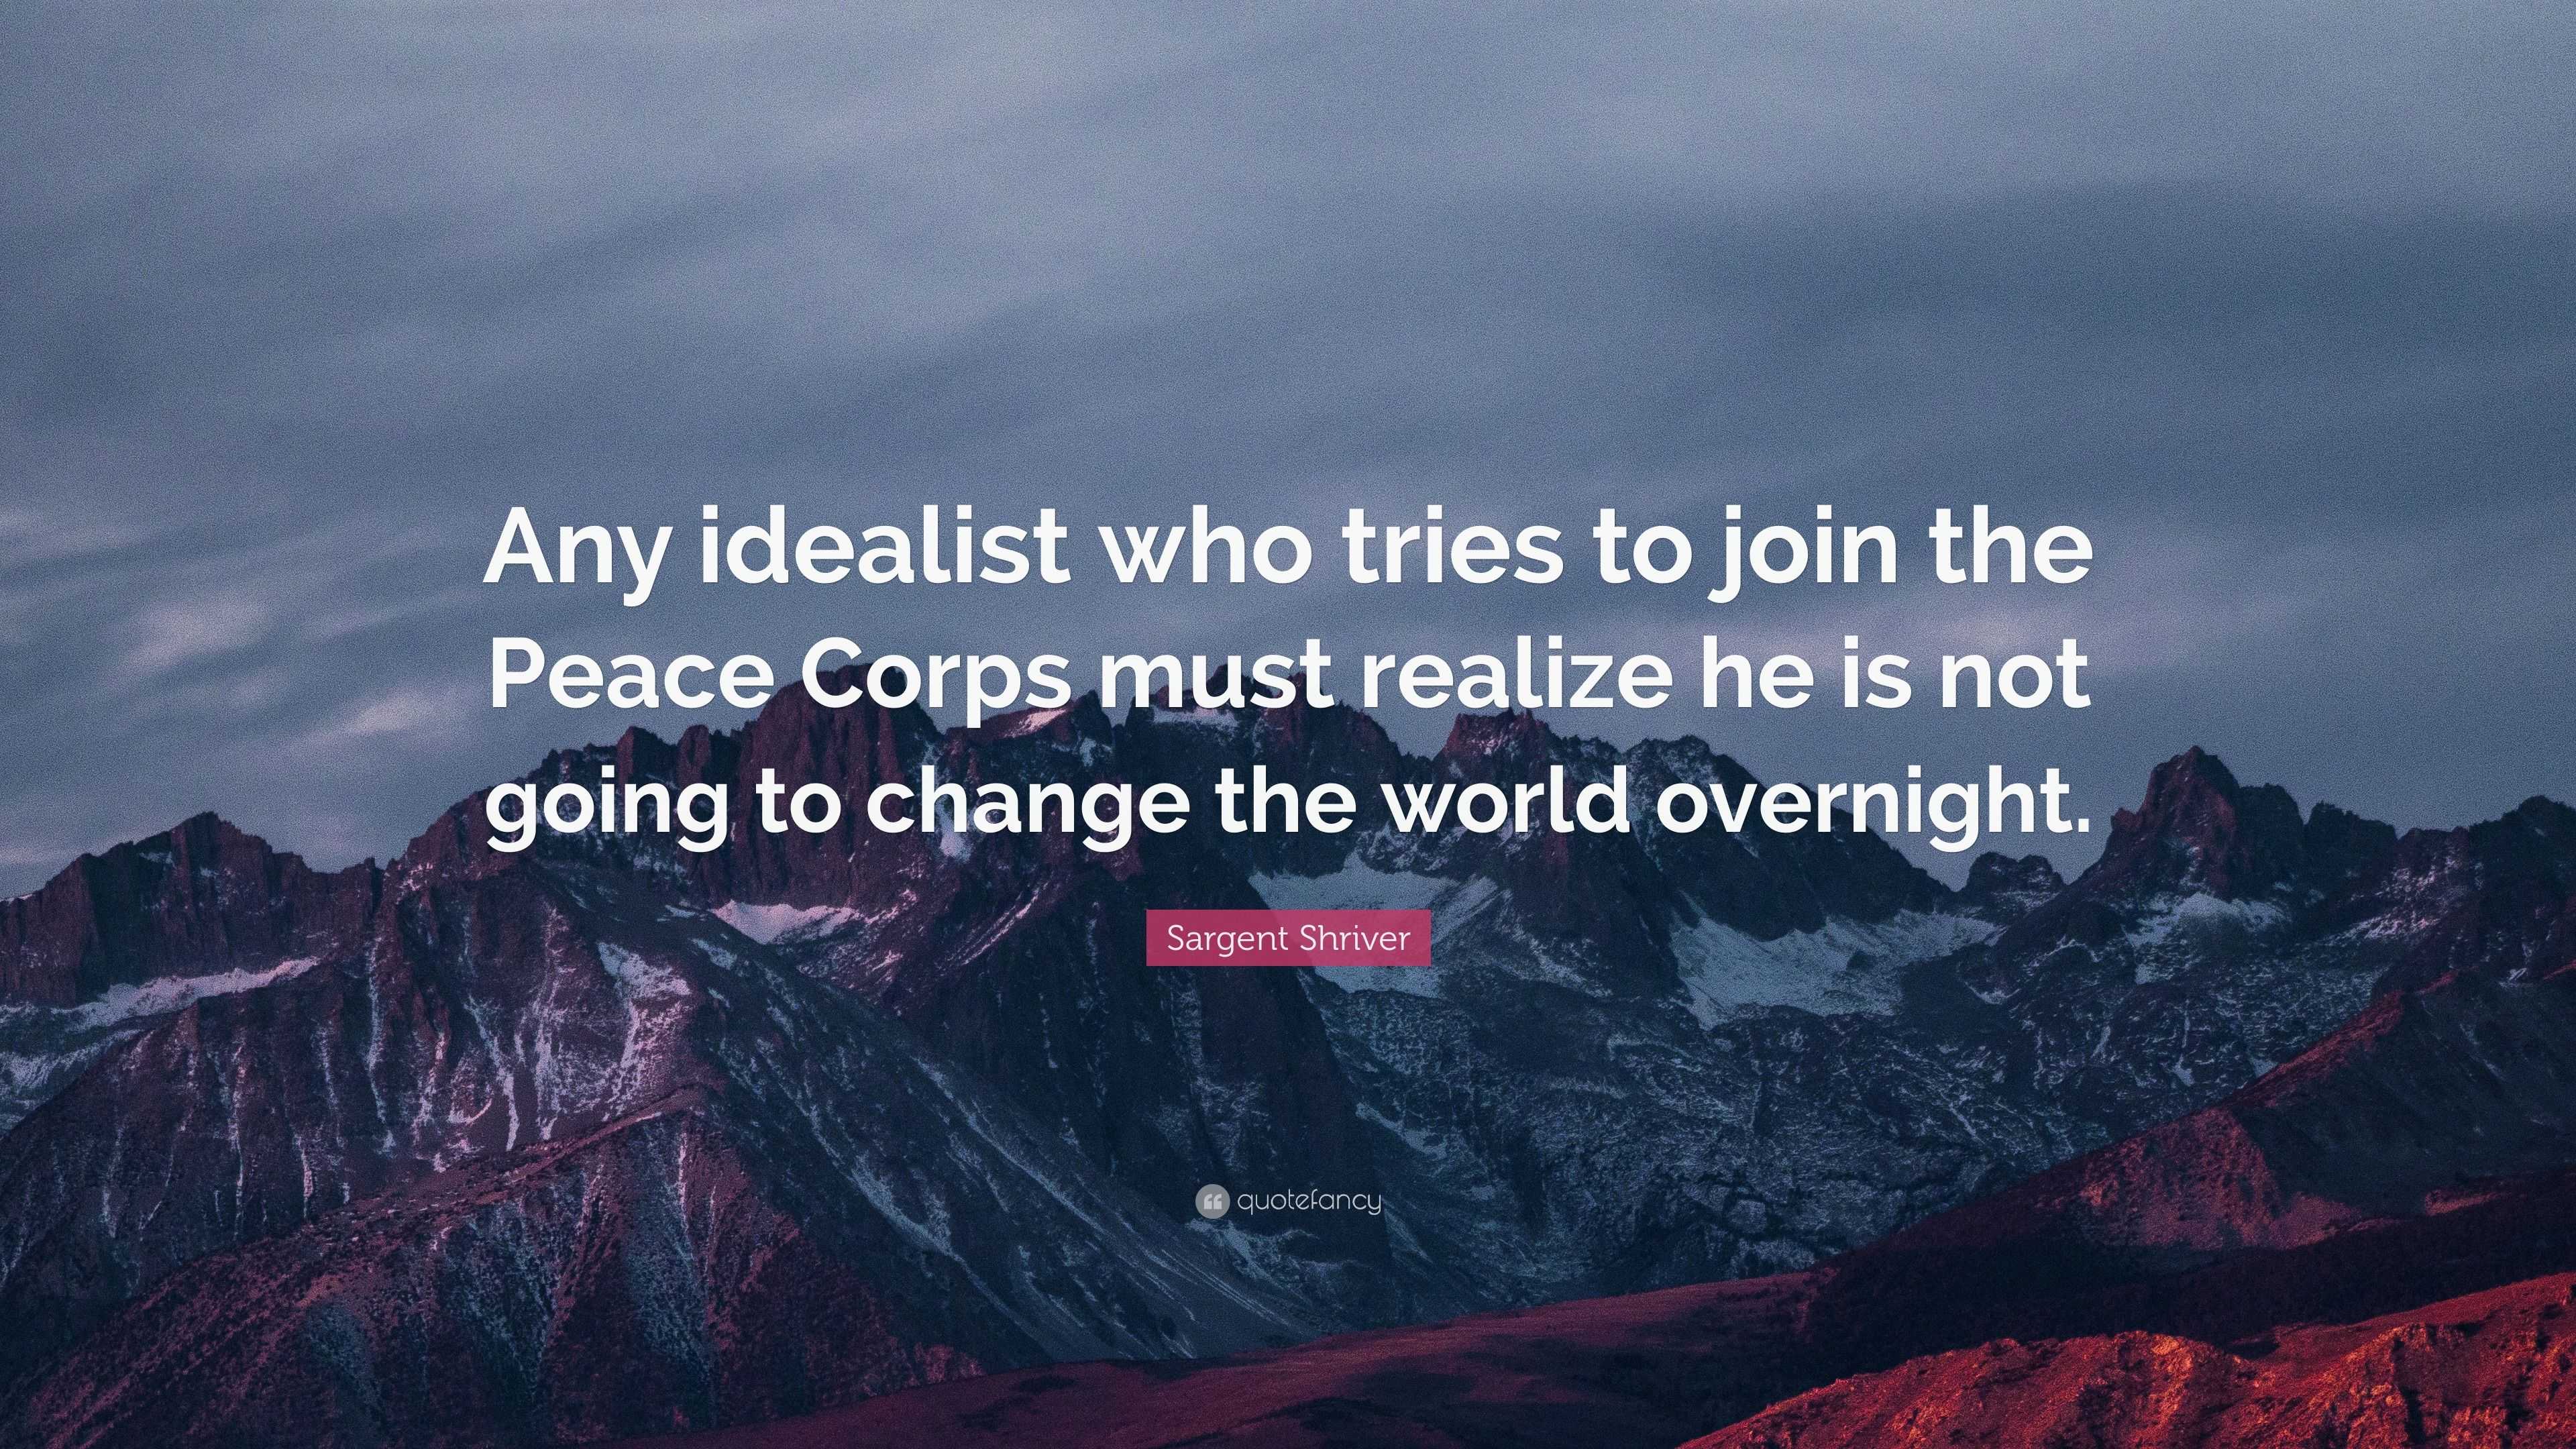 Sargent Shriver Quote: “Any idealist who tries to join the Peace Corps ...